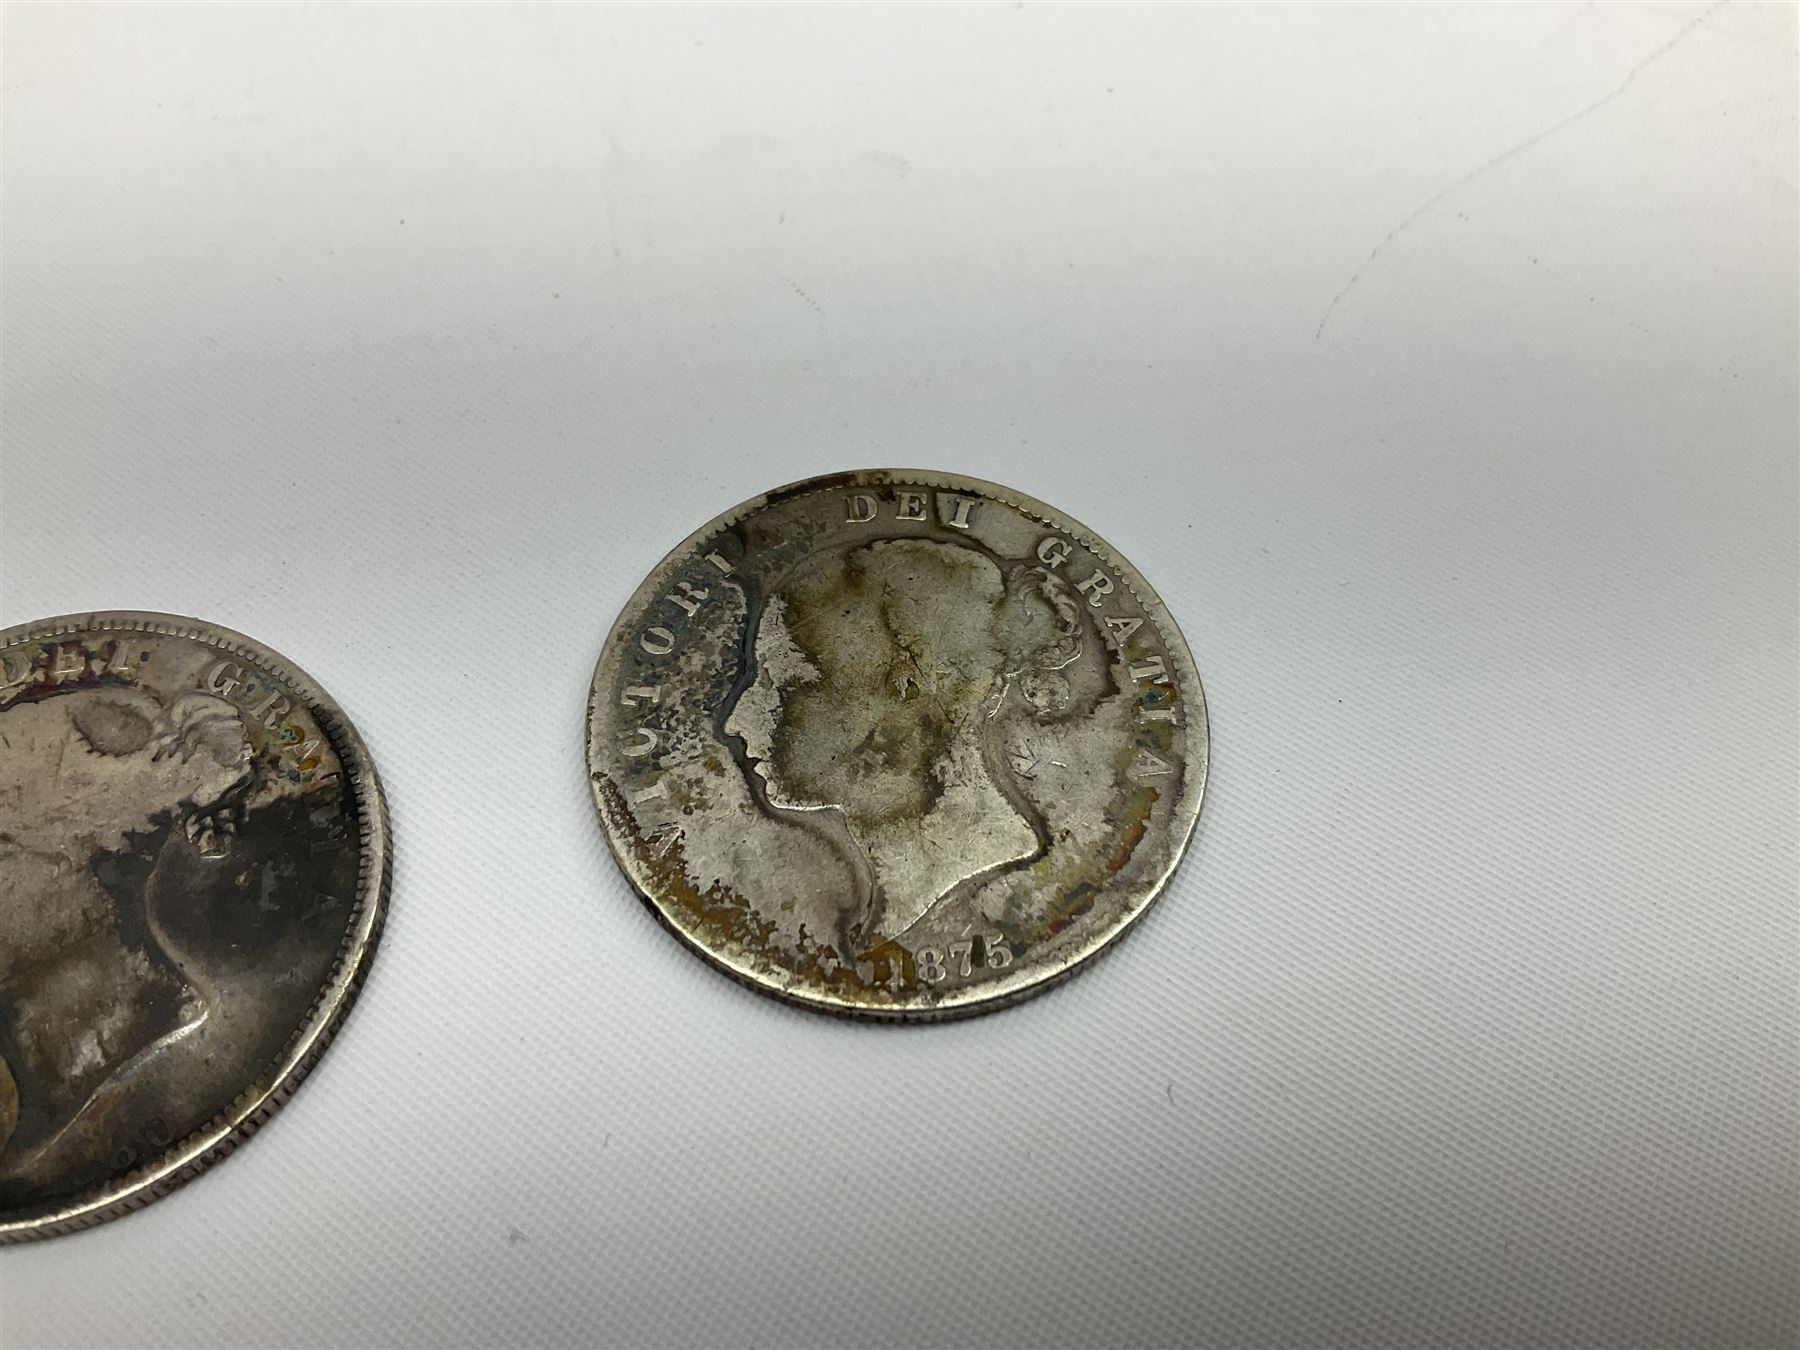 Queen Victoria 1875 and 1880 half crown coin - Image 5 of 7